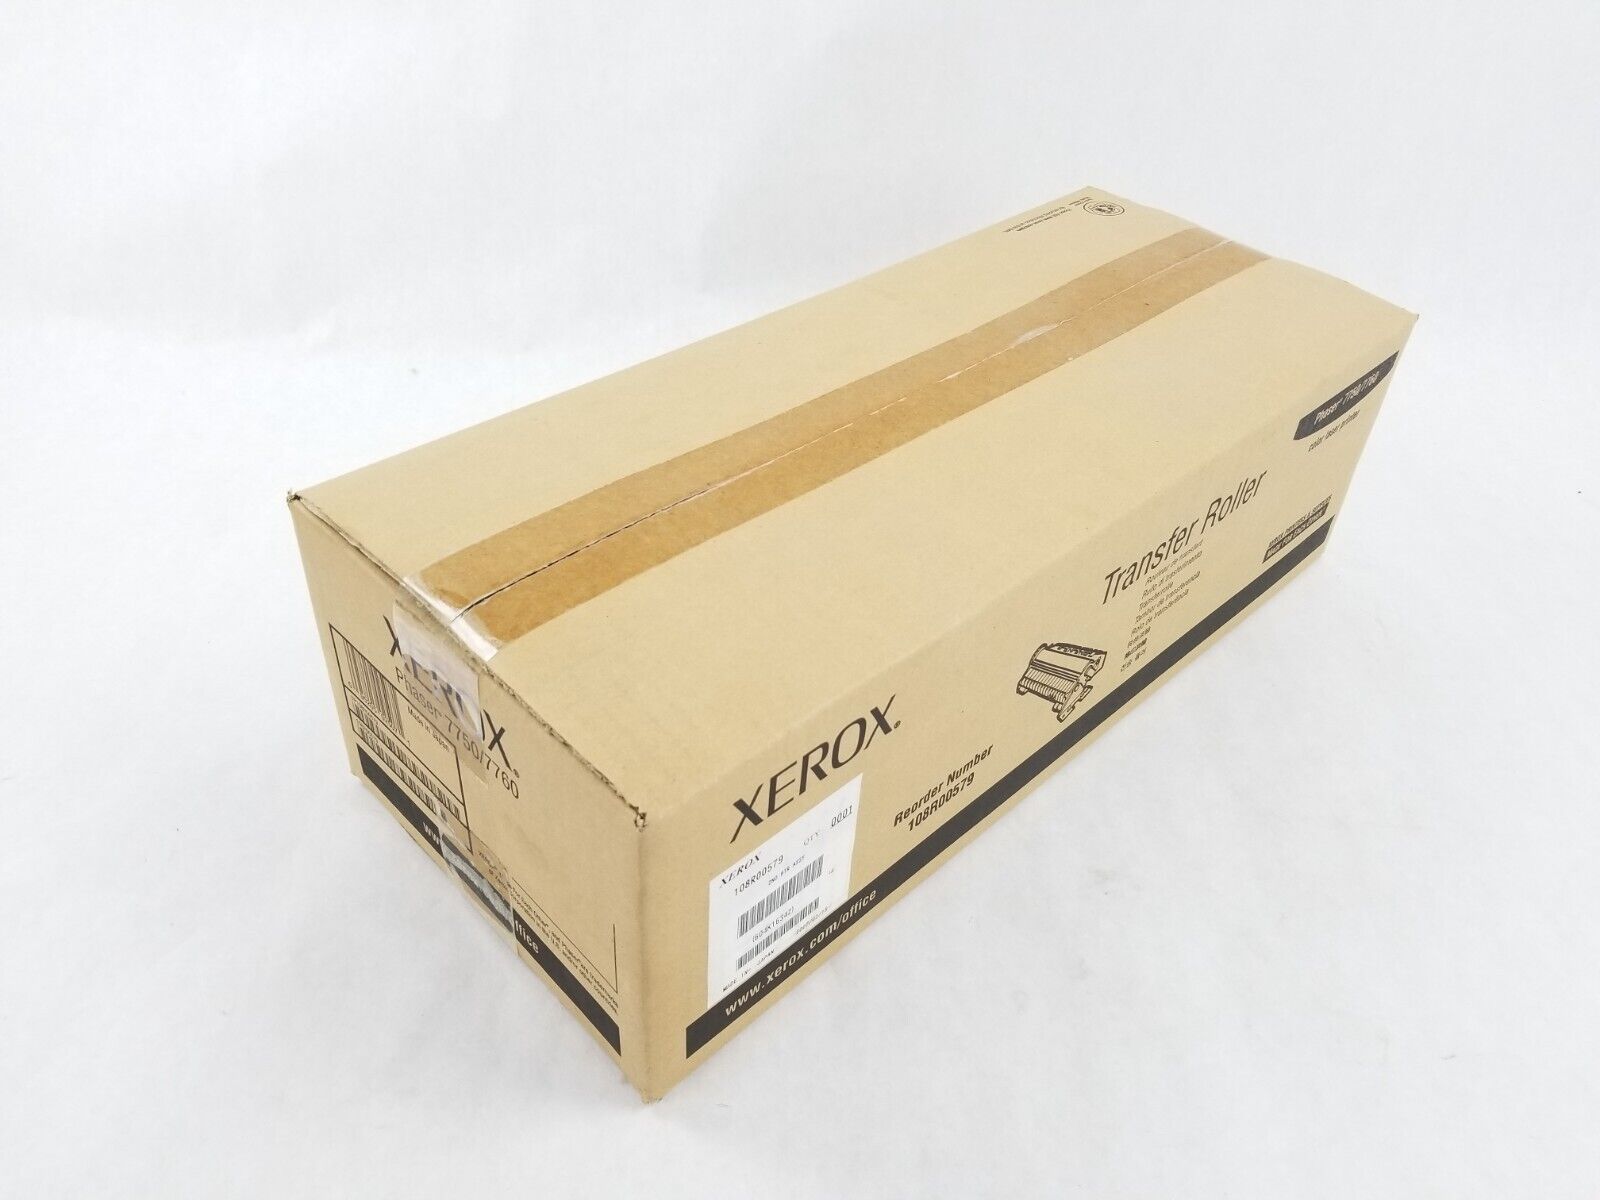 XEROX 108R00579 Transfer Roller Phaser 7750 7760 Color NEW Genuine Sealed in Box